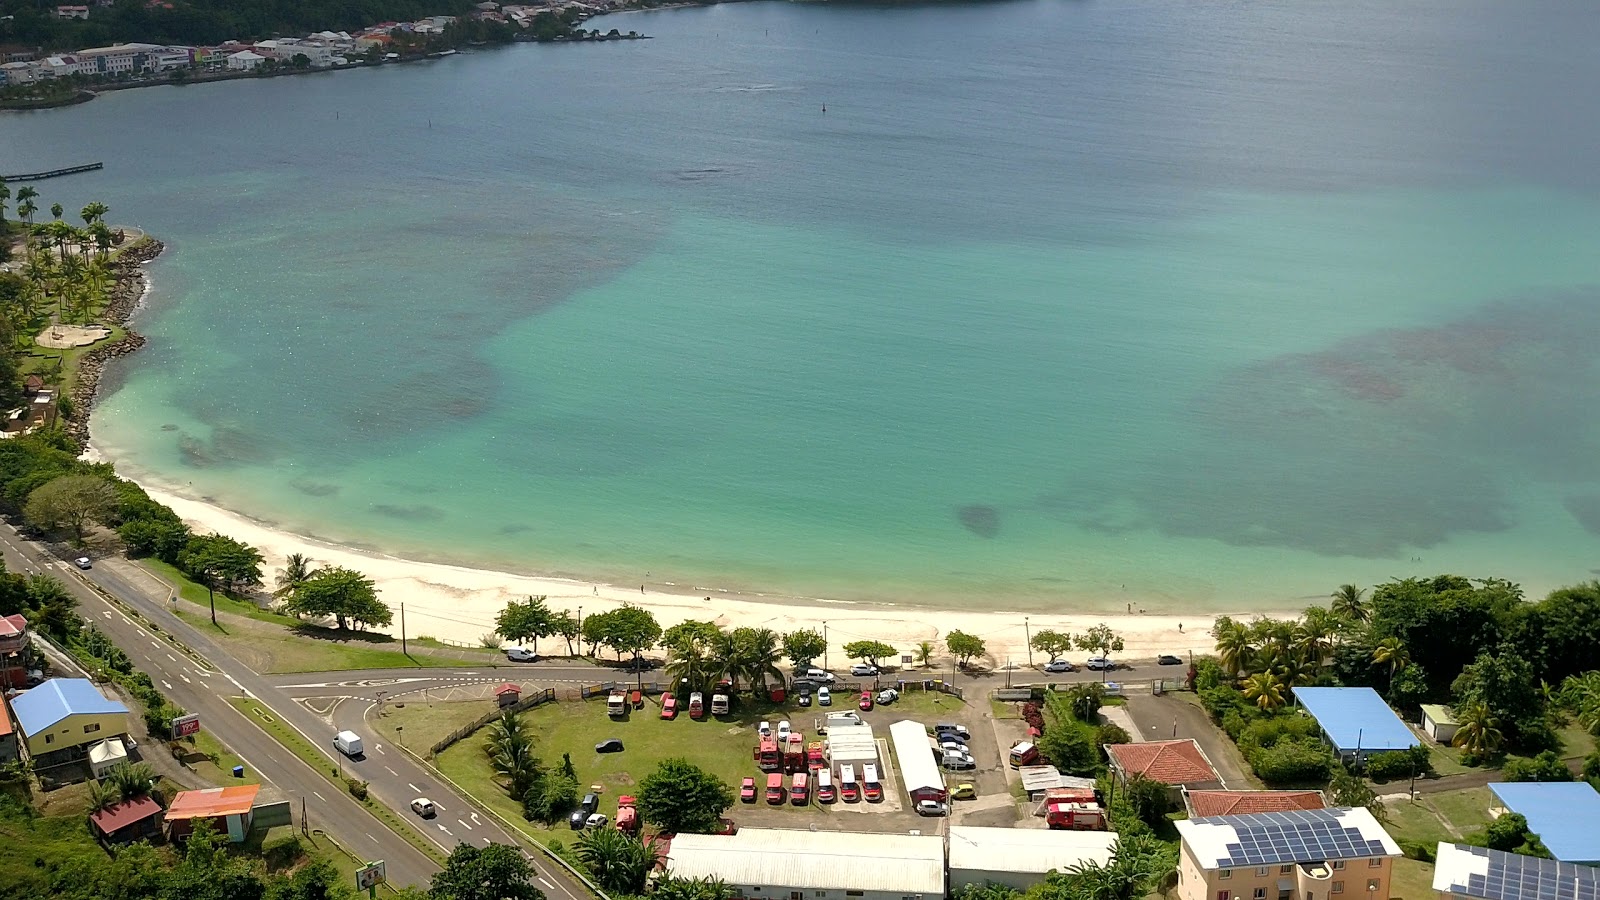 Photo of Plage des Raisiniers and the settlement